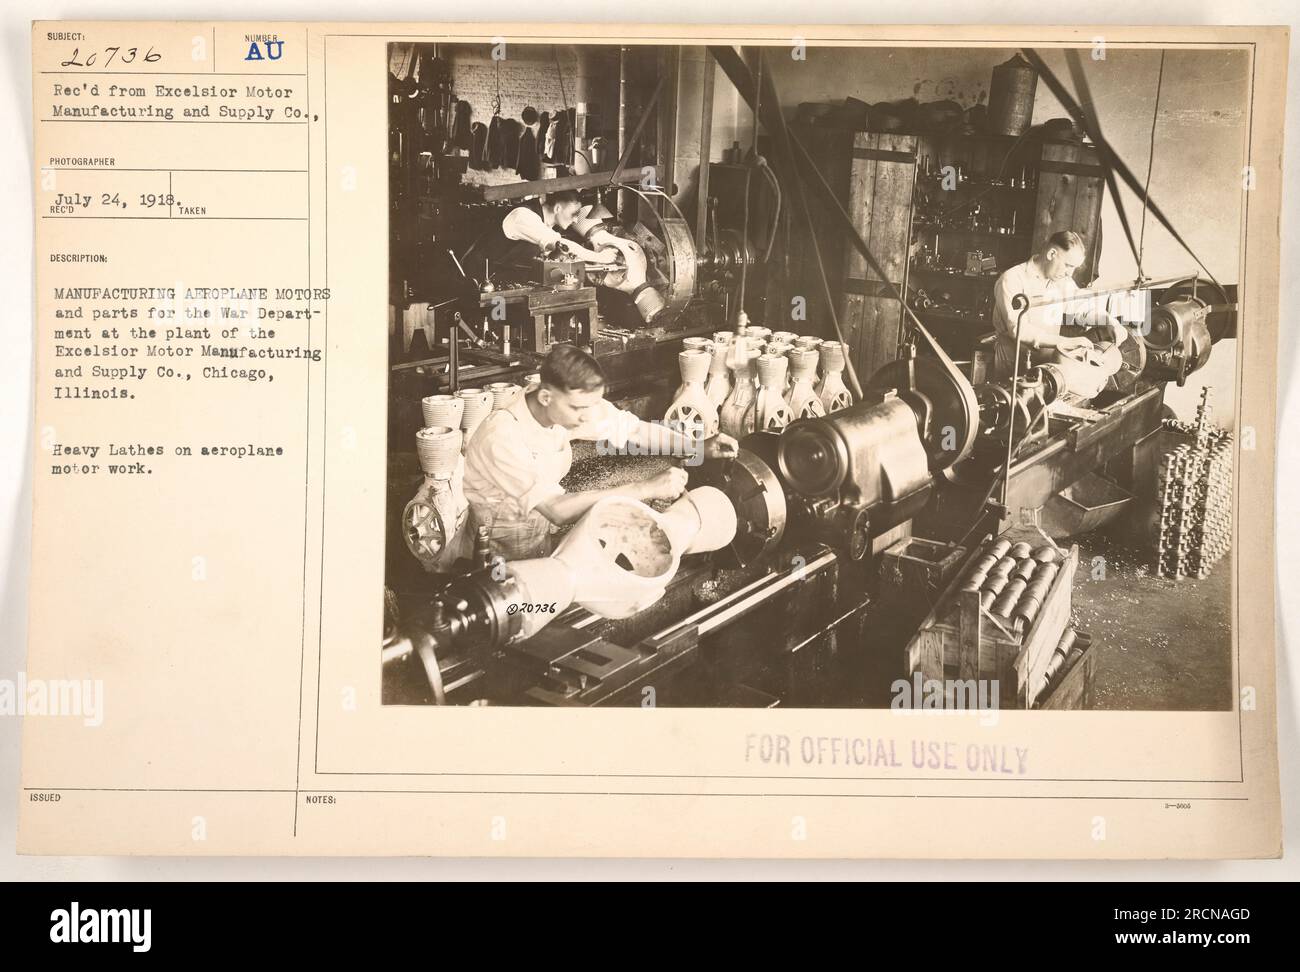 Workers at the Excelsior Motor Manufacturing and Supply Co. in Chicago, Illinois, manufacturing aeroplane motors and parts for the War Department during World War I. In the photograph, heavy lathes are used for the aeroplane motor work. This image is designated as 111-SC-20736 and was taken on July 24, 1918. Stock Photo